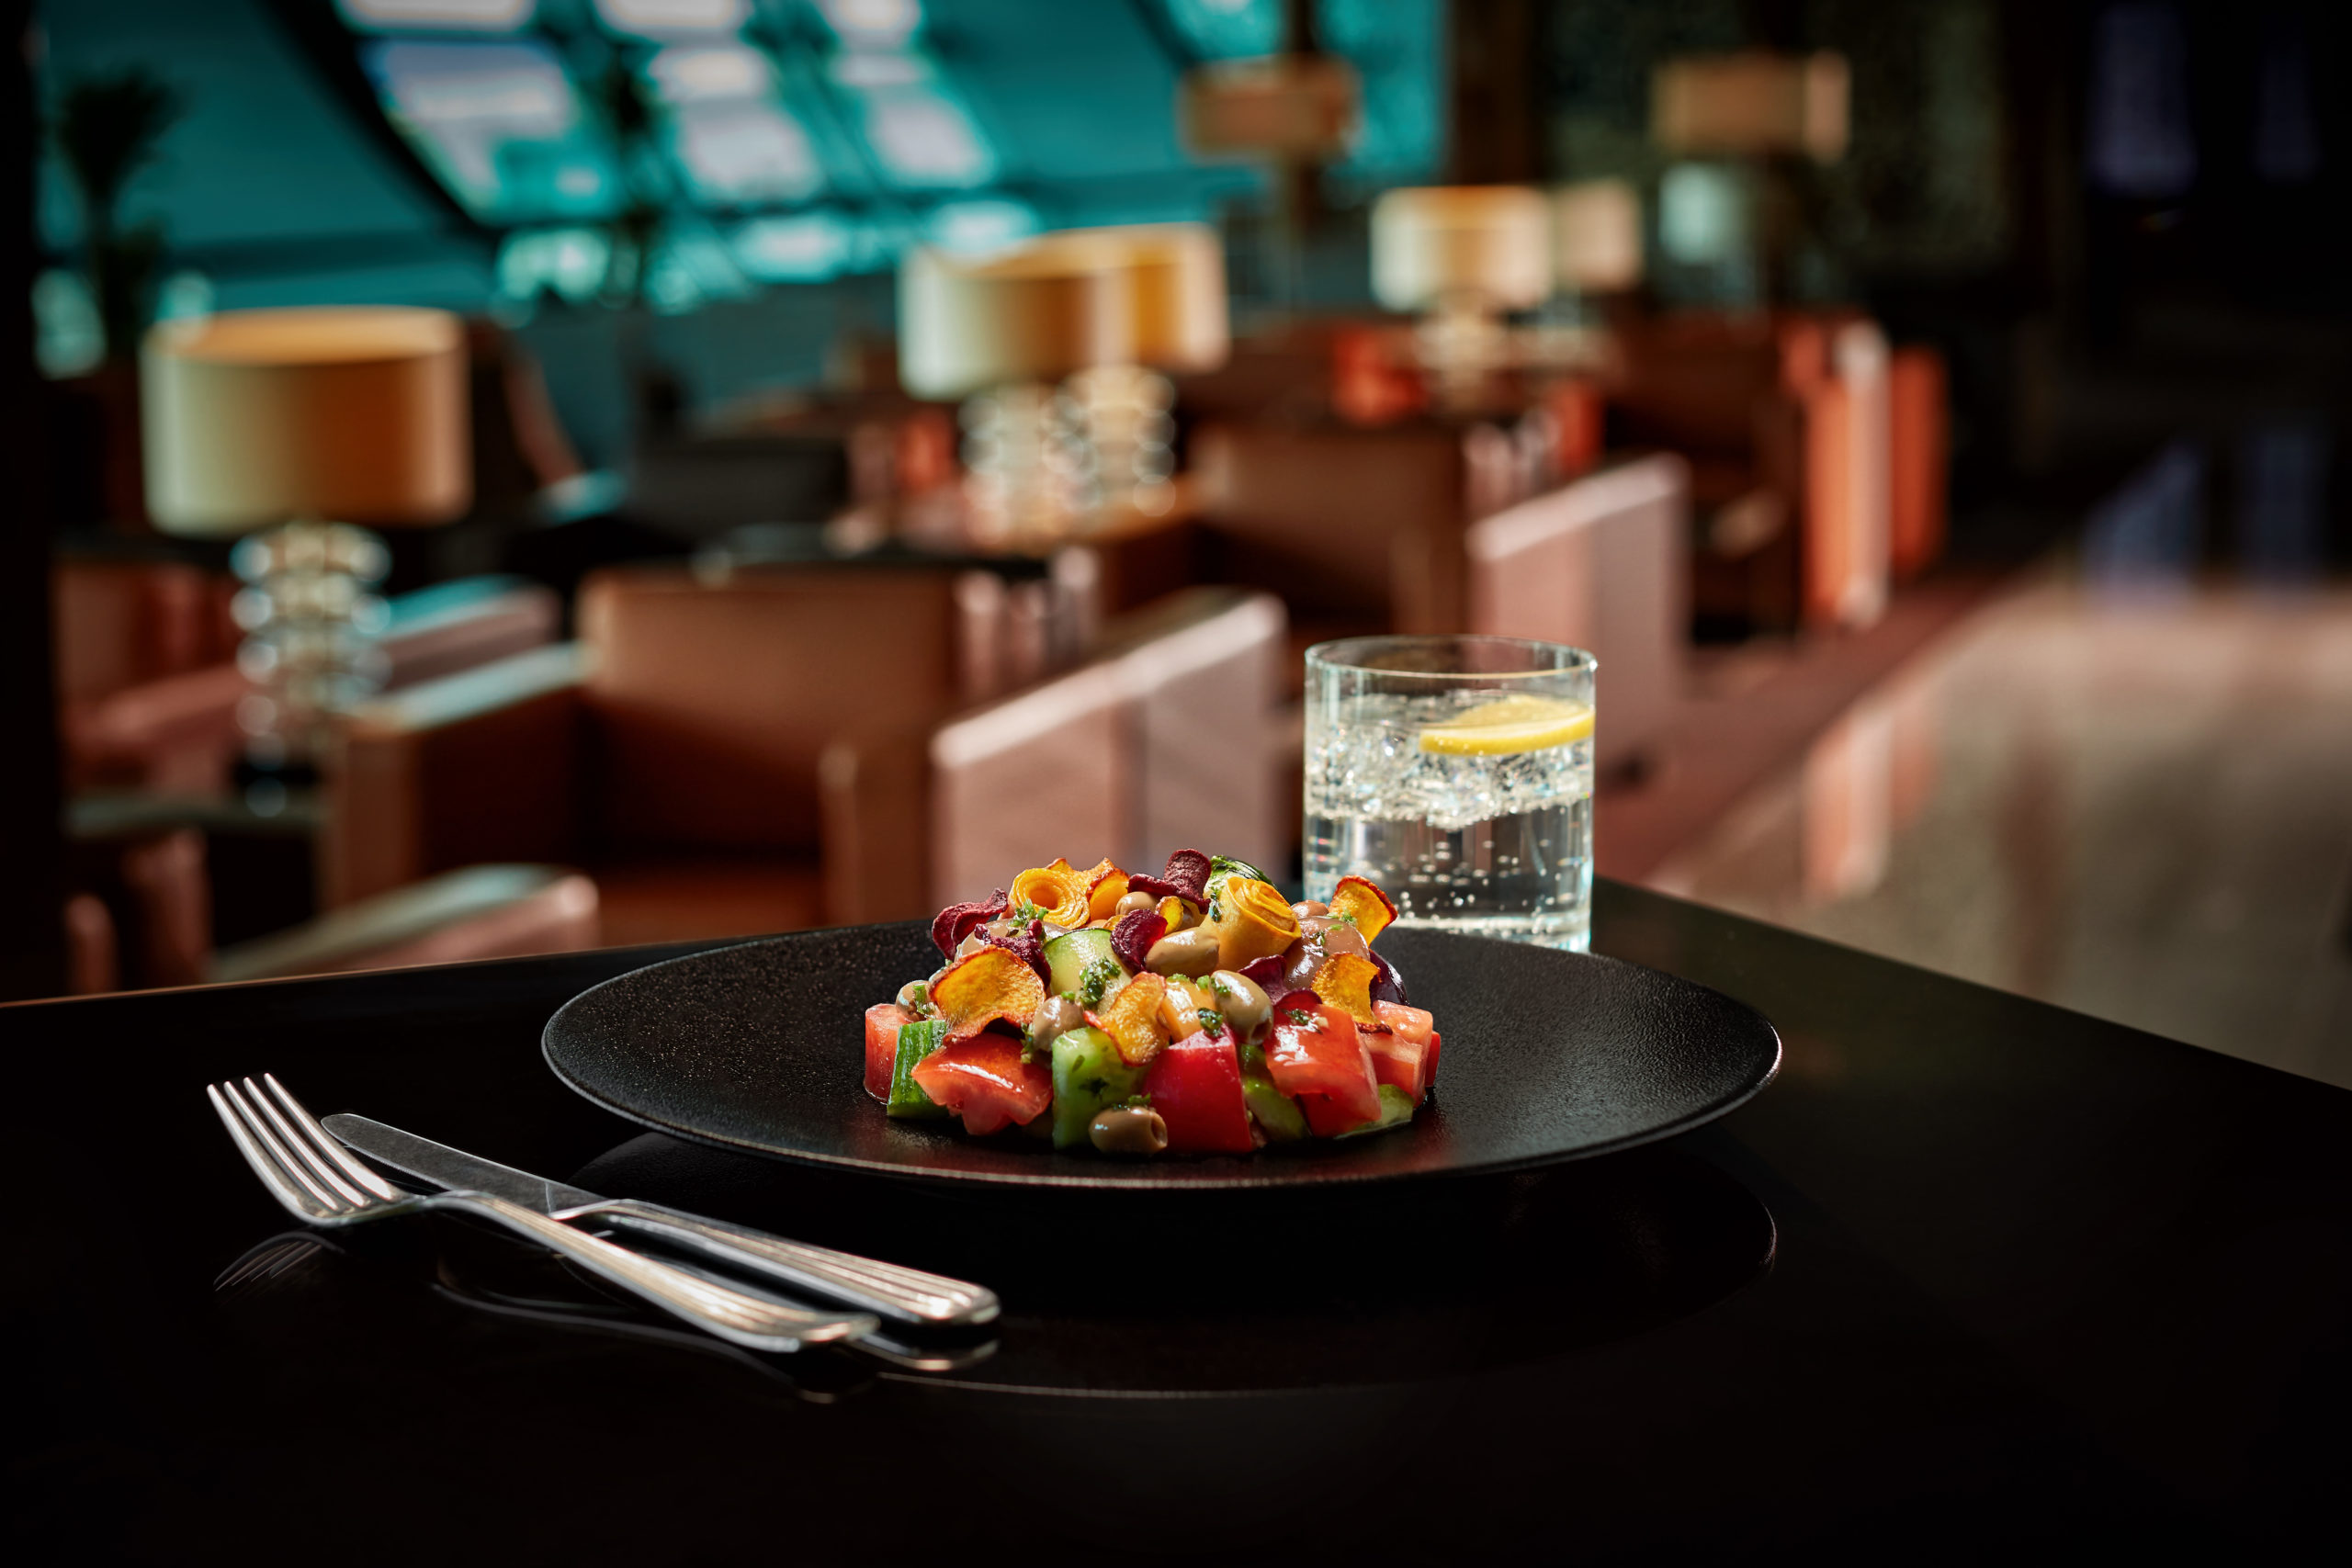 Emirates has a vegan culinary repertoire of more than 170 dishes including the Vegan Mediterranean Salad offered at Emirates Premium Lounge in Dubai